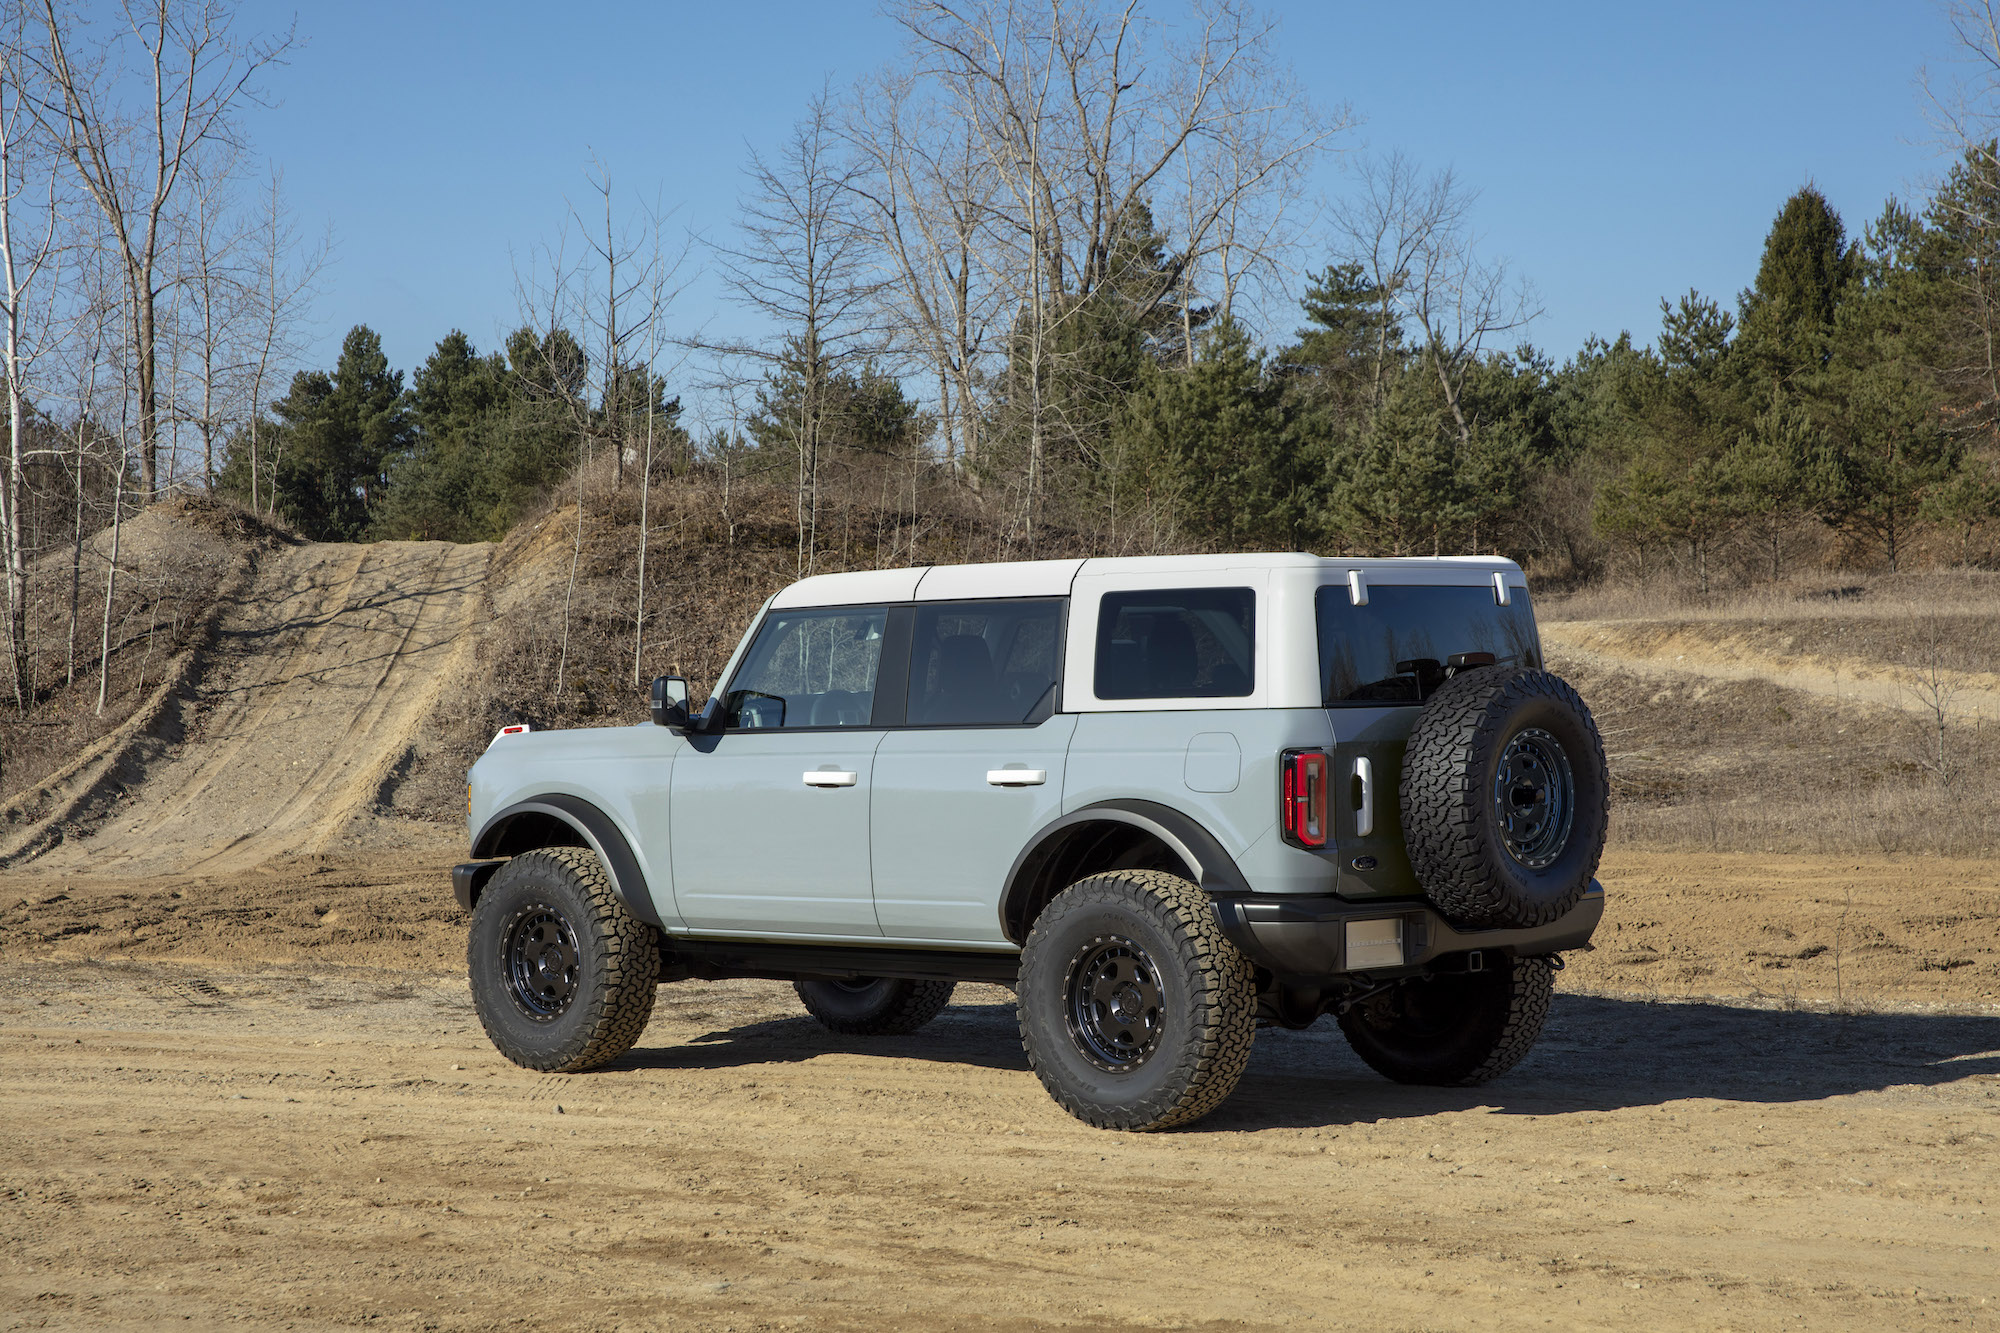 A four-door 2021 Ford Bronco SUV parked on a dirt trail near the woods